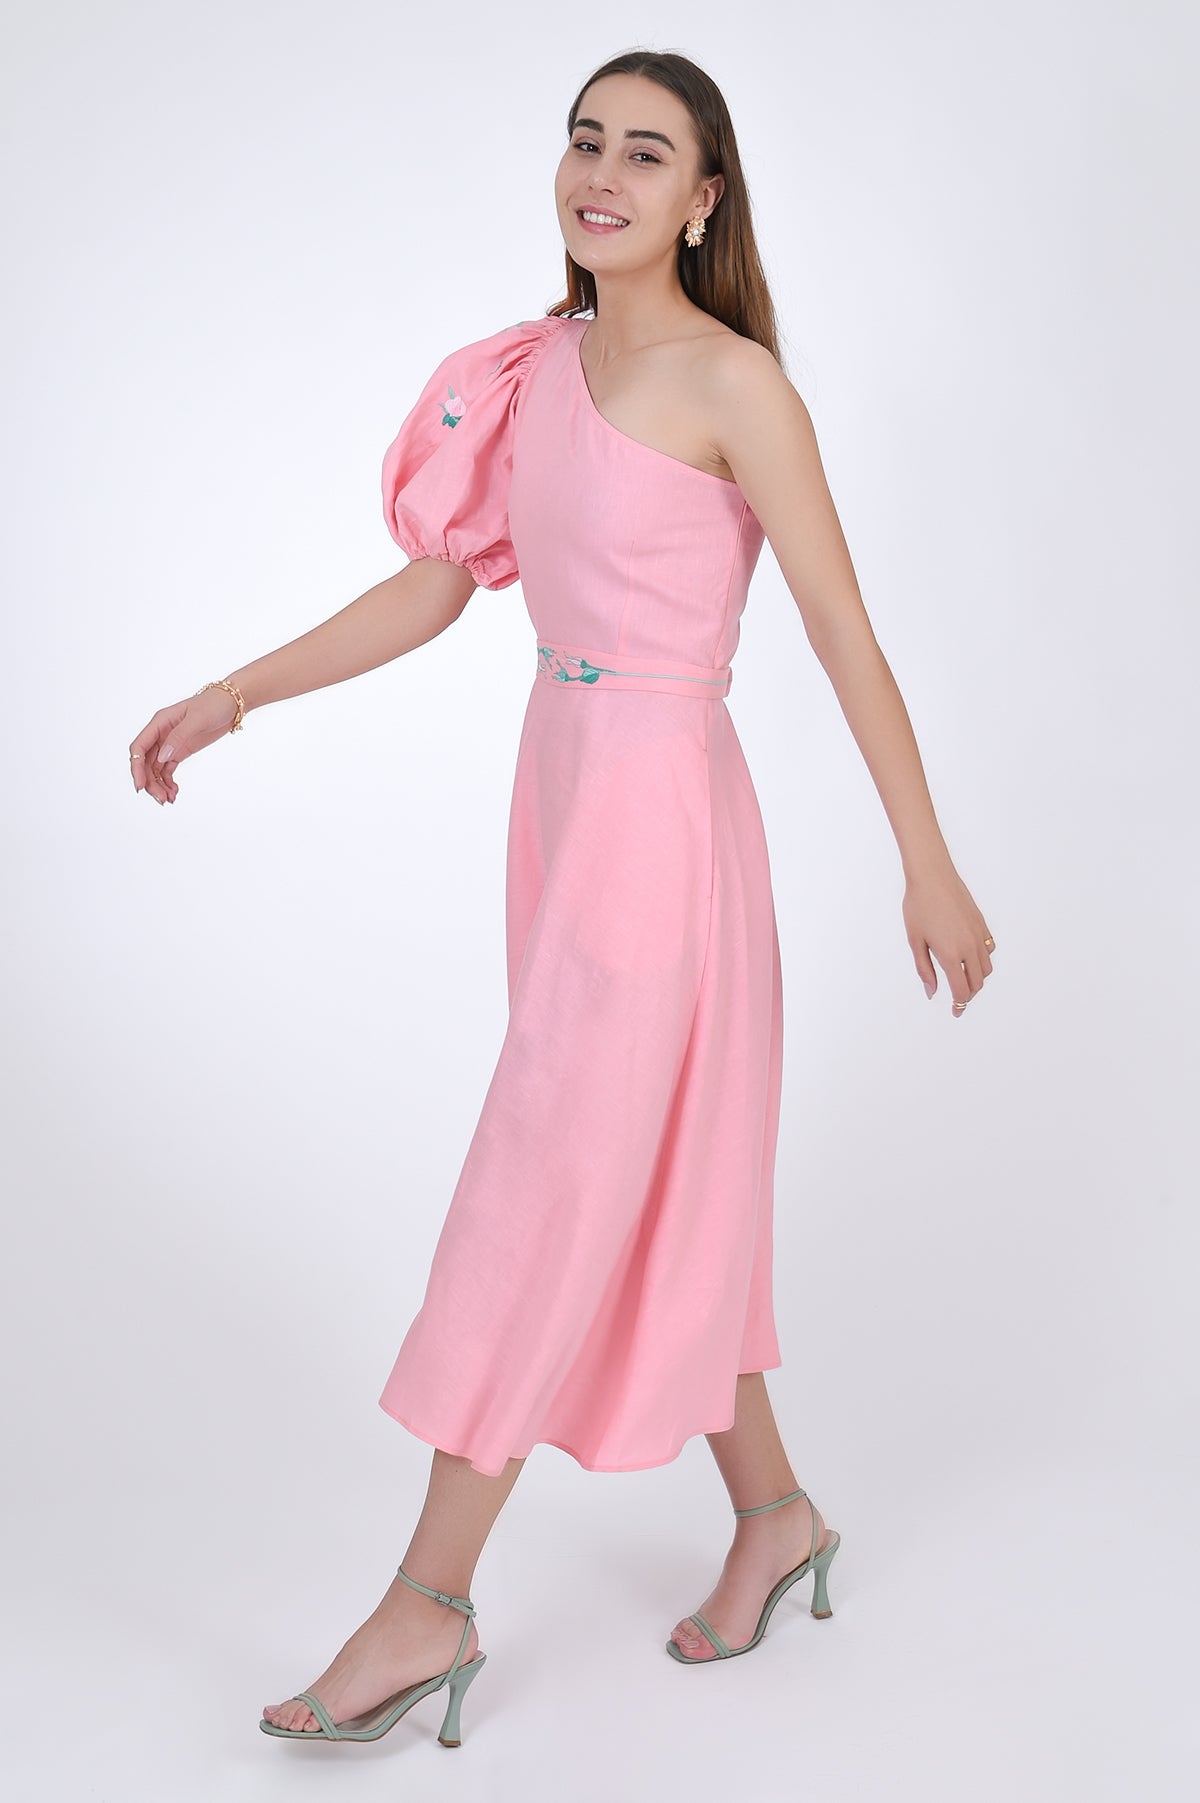 Fanm Mon Ayisha Midi Linen one shoulder Dress, side view with movement. Featuring a puff sleeve one shoulder design with embroidered floral pattern. 